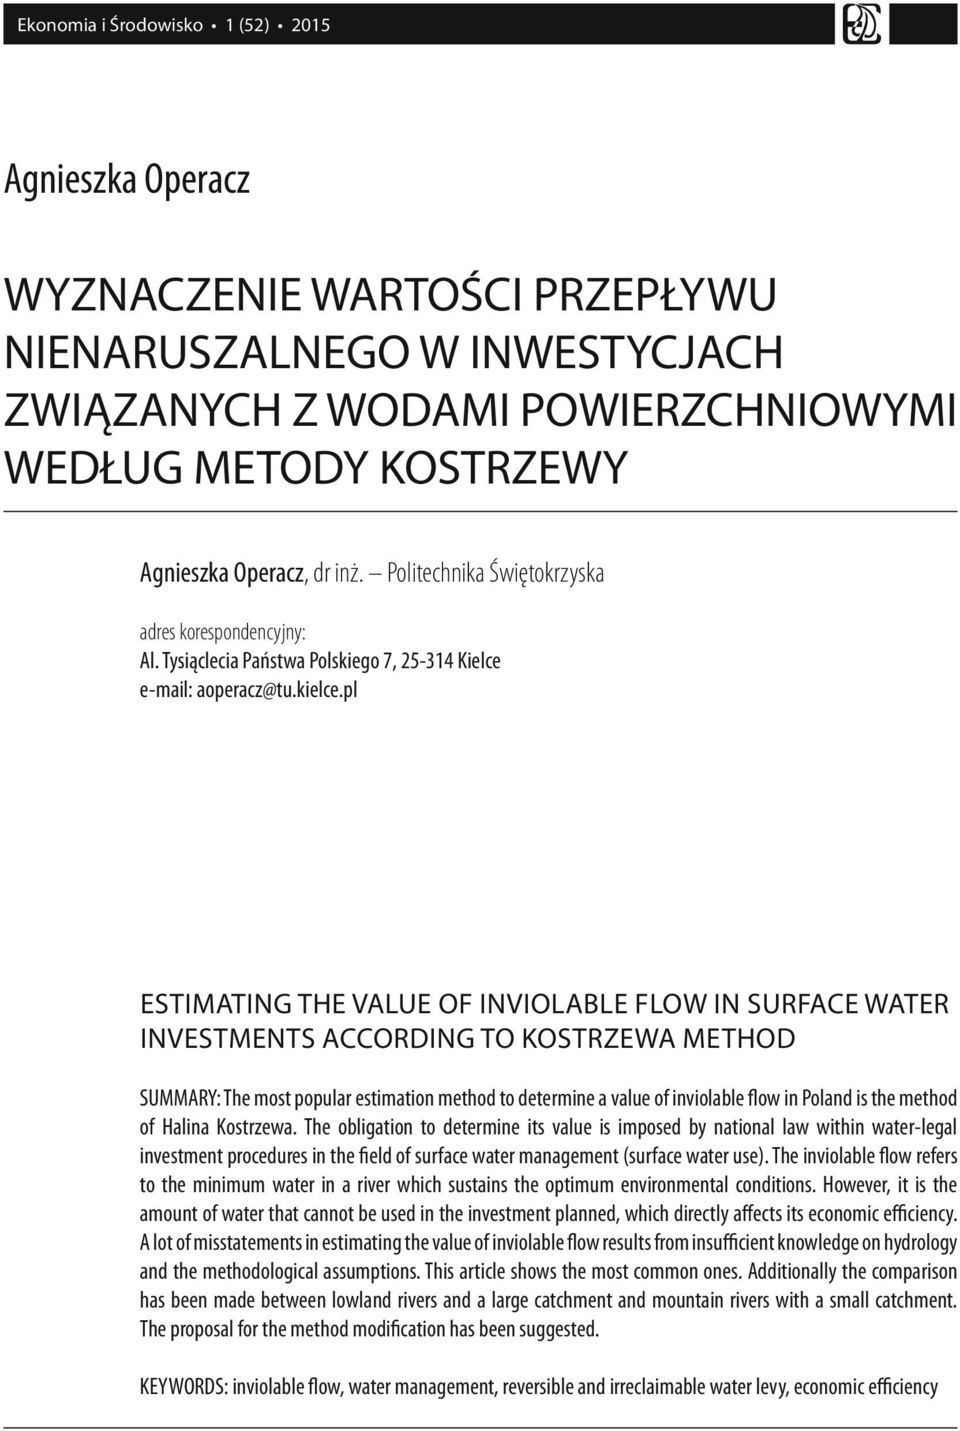 pl ESTIMATING THE VALUE OF INVIOLABLE FLOW IN SURFACE WATER INVESTMENTS ACCORDING TO KOSTRZEWA METHOD SUMMARY: The most popular estimation method to determine a value of inviolable flow in Poland is